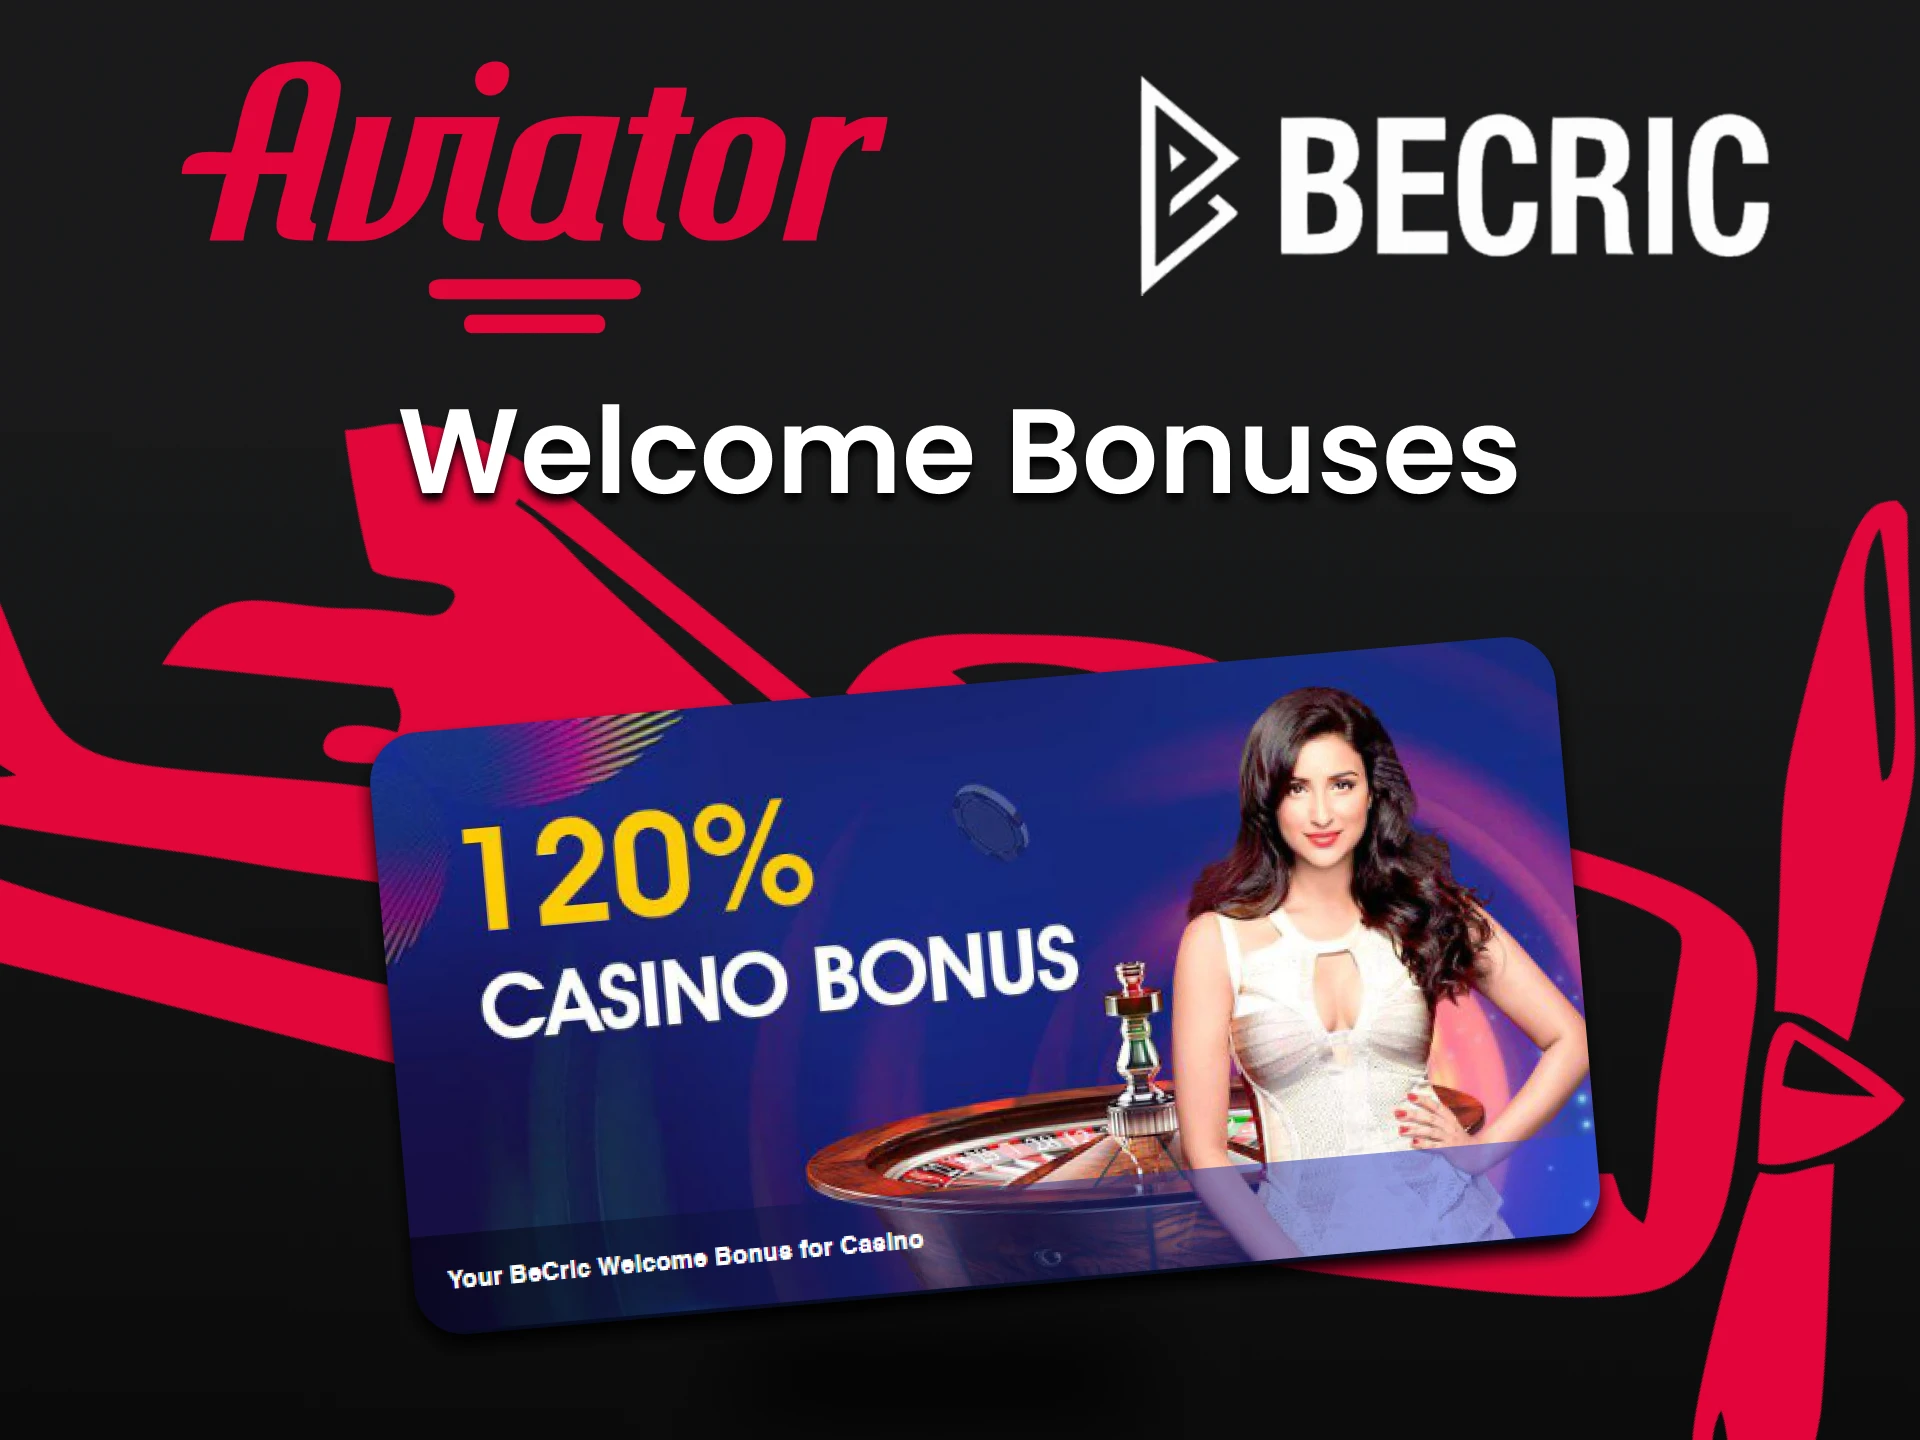 Get a bonus from Becric for playing Aviator.